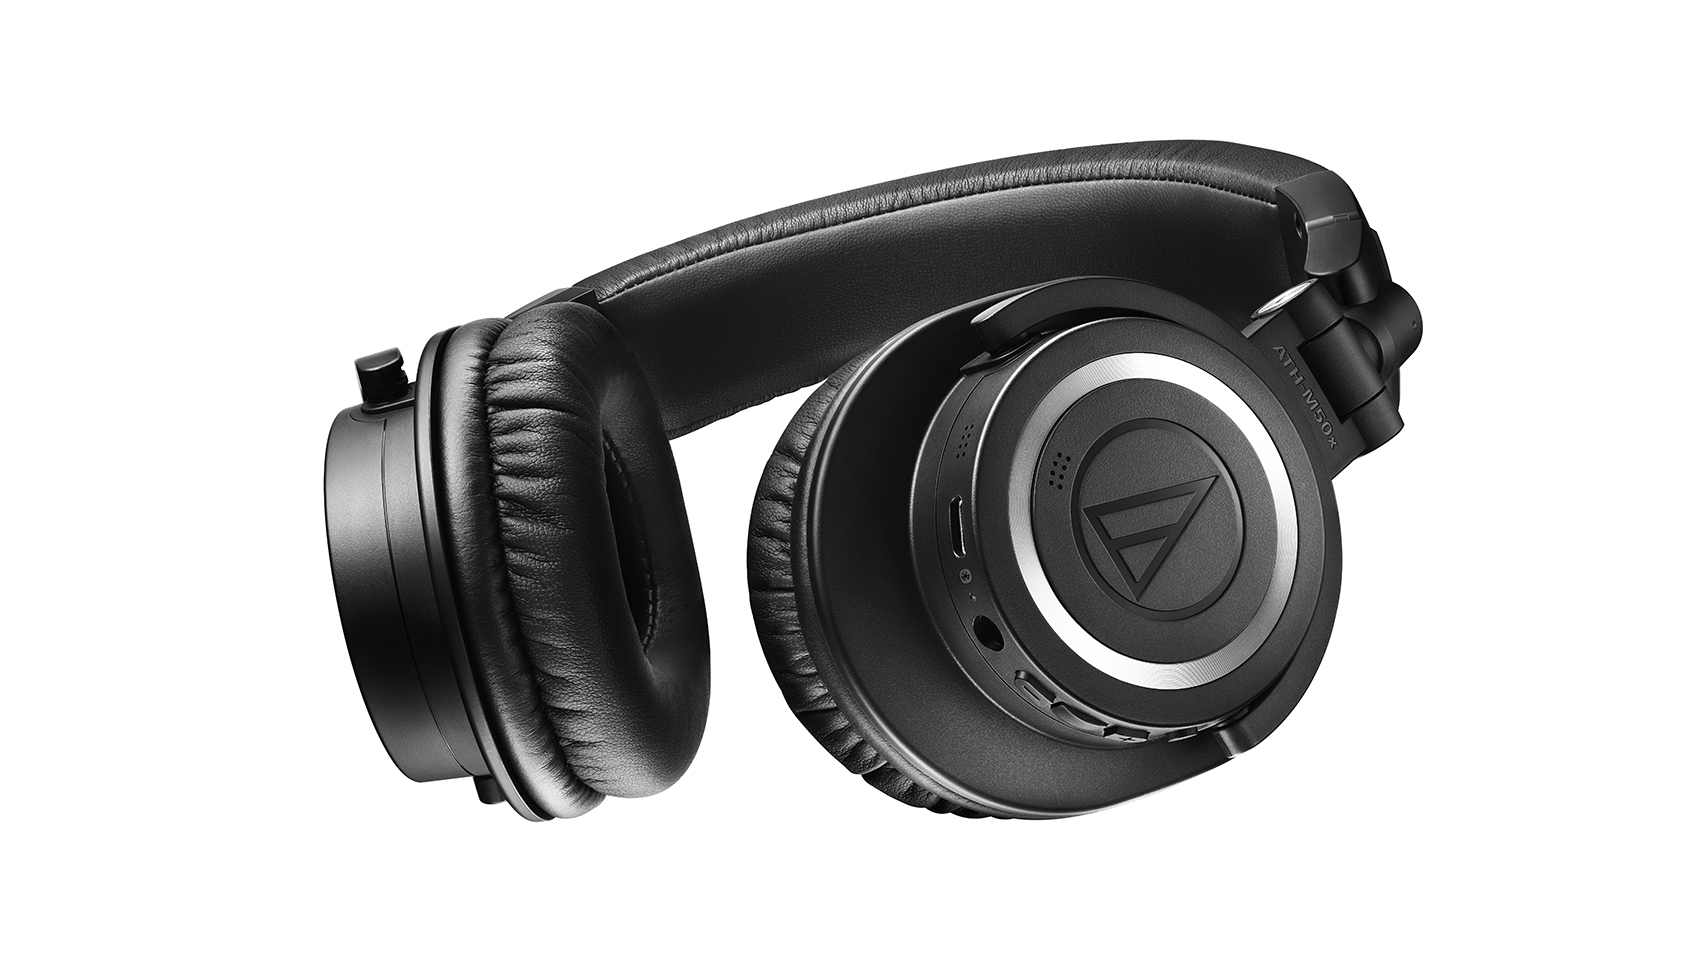 Audio-Technica ATH-M50xBT2 review | What Hi-Fi?